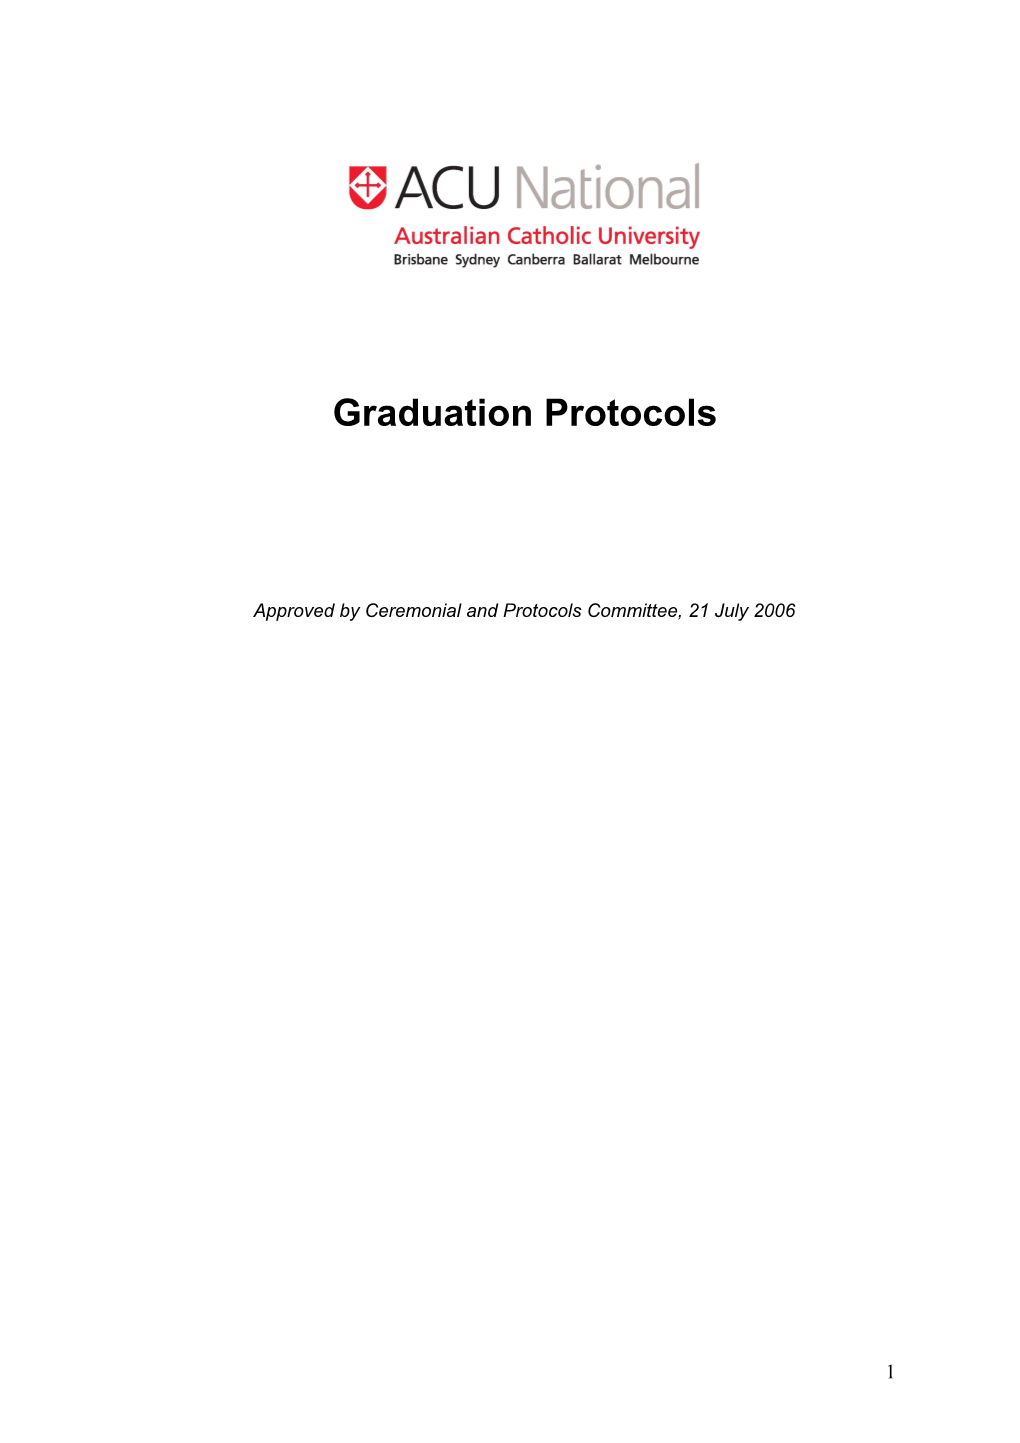 3 Protocol/Procedural Functions Carried out Prior to the Graduation Ceremony 7